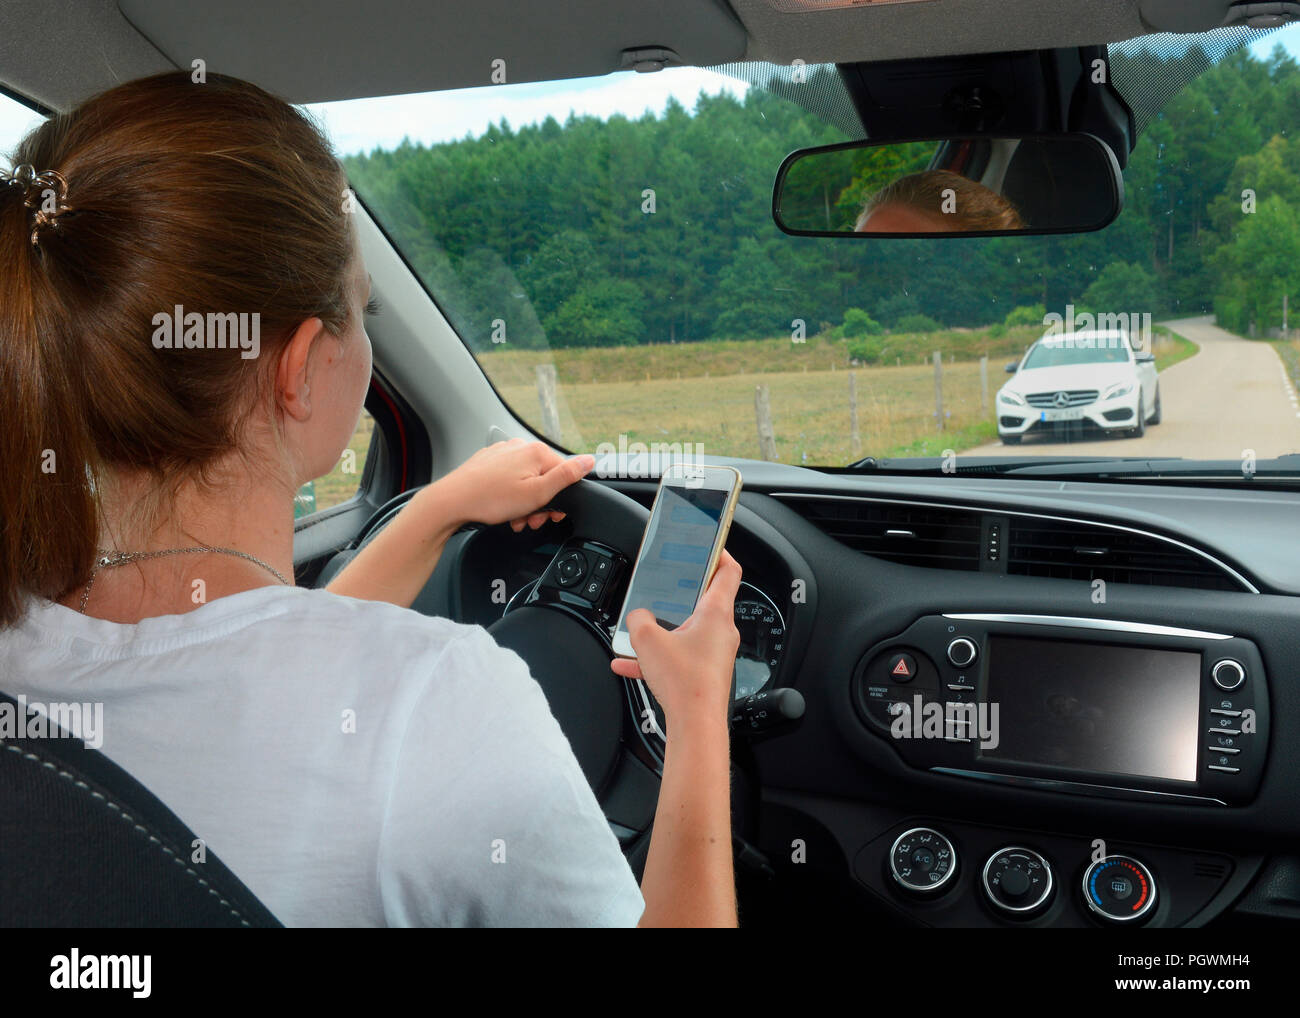 Young woman using a mobil phone while she drive a car, Sweden Stock Photo